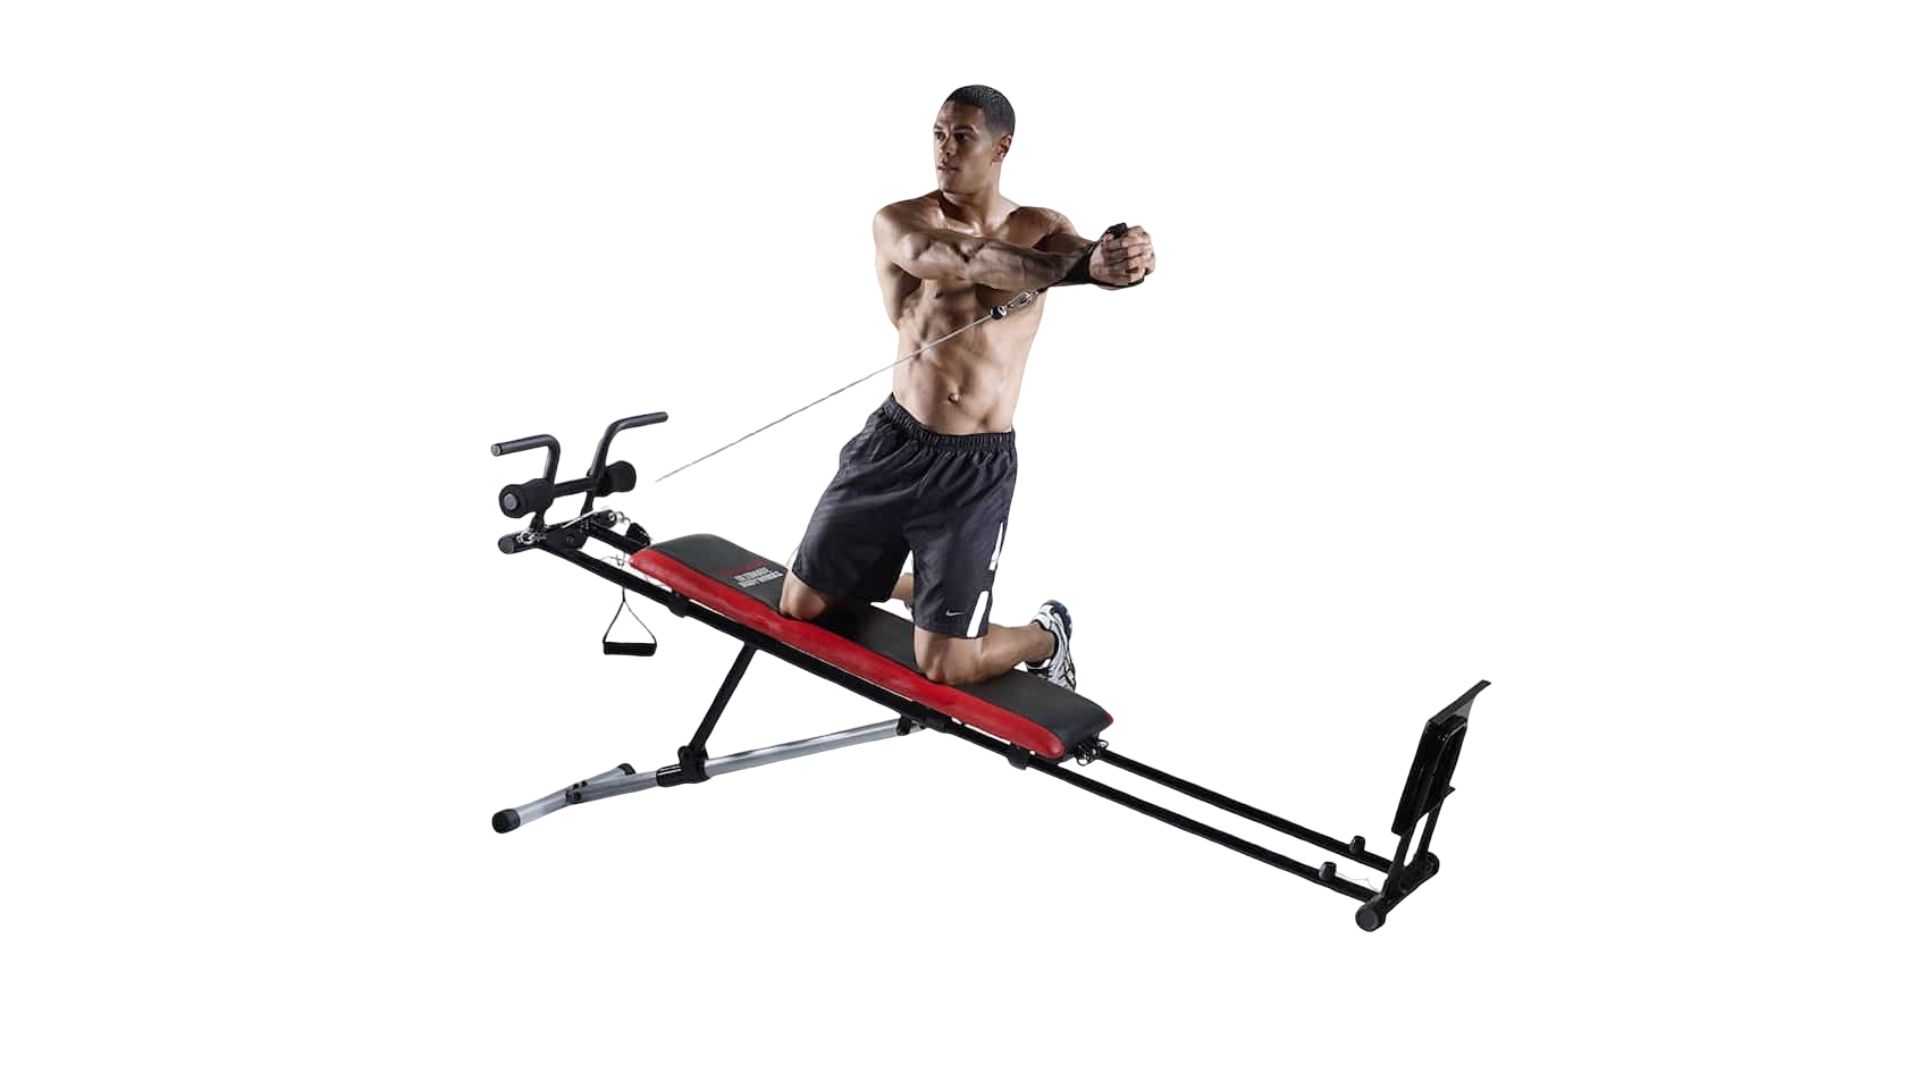 The Best Home Gym Equipment Of 2020 – 20 Fit